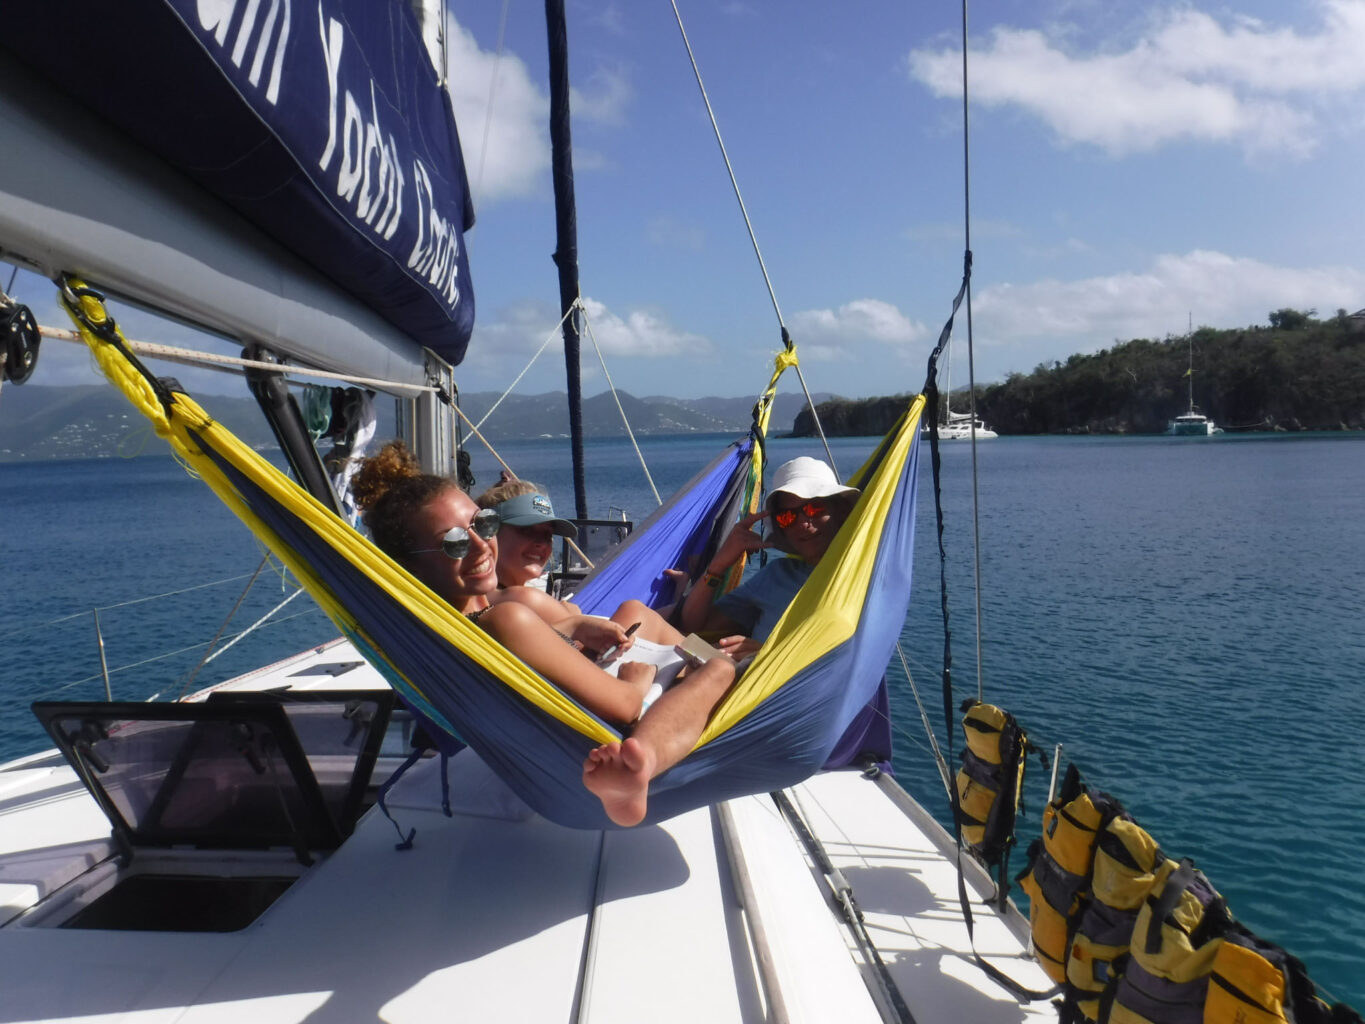 Two people relaxing in a hammock on a sailboat.